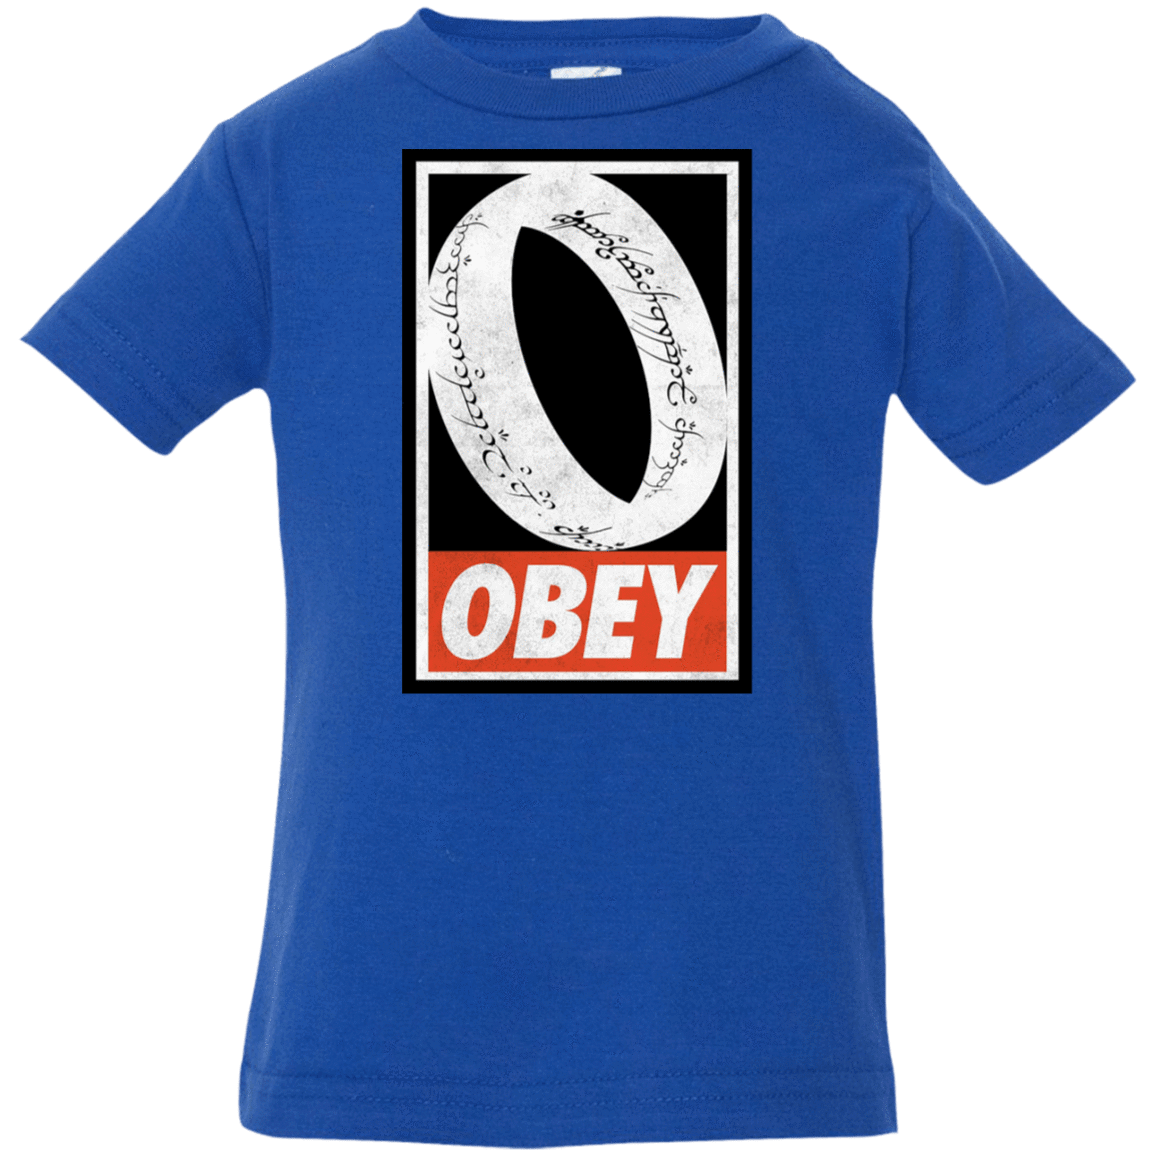 T-Shirts Royal / 6 Months Obey One Ring Infant Premium T-Shirt